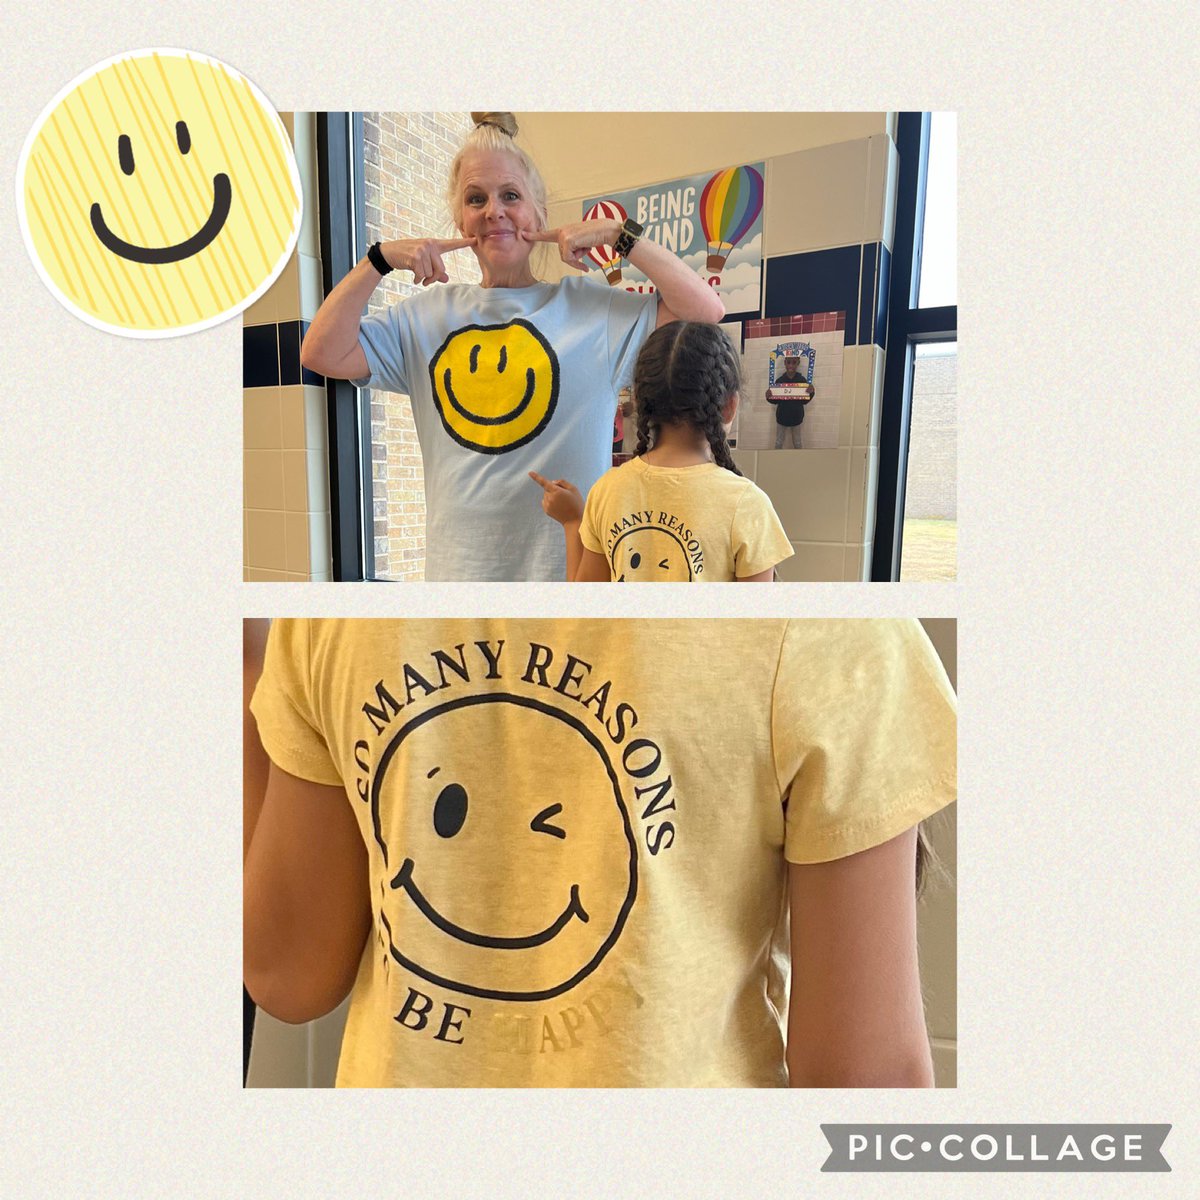 We have so many reasons to be happy at Bryson Elementary 😊.  Our wonderful counselor and great students are just two of those. @BrysonBobcats #BobcatsRock